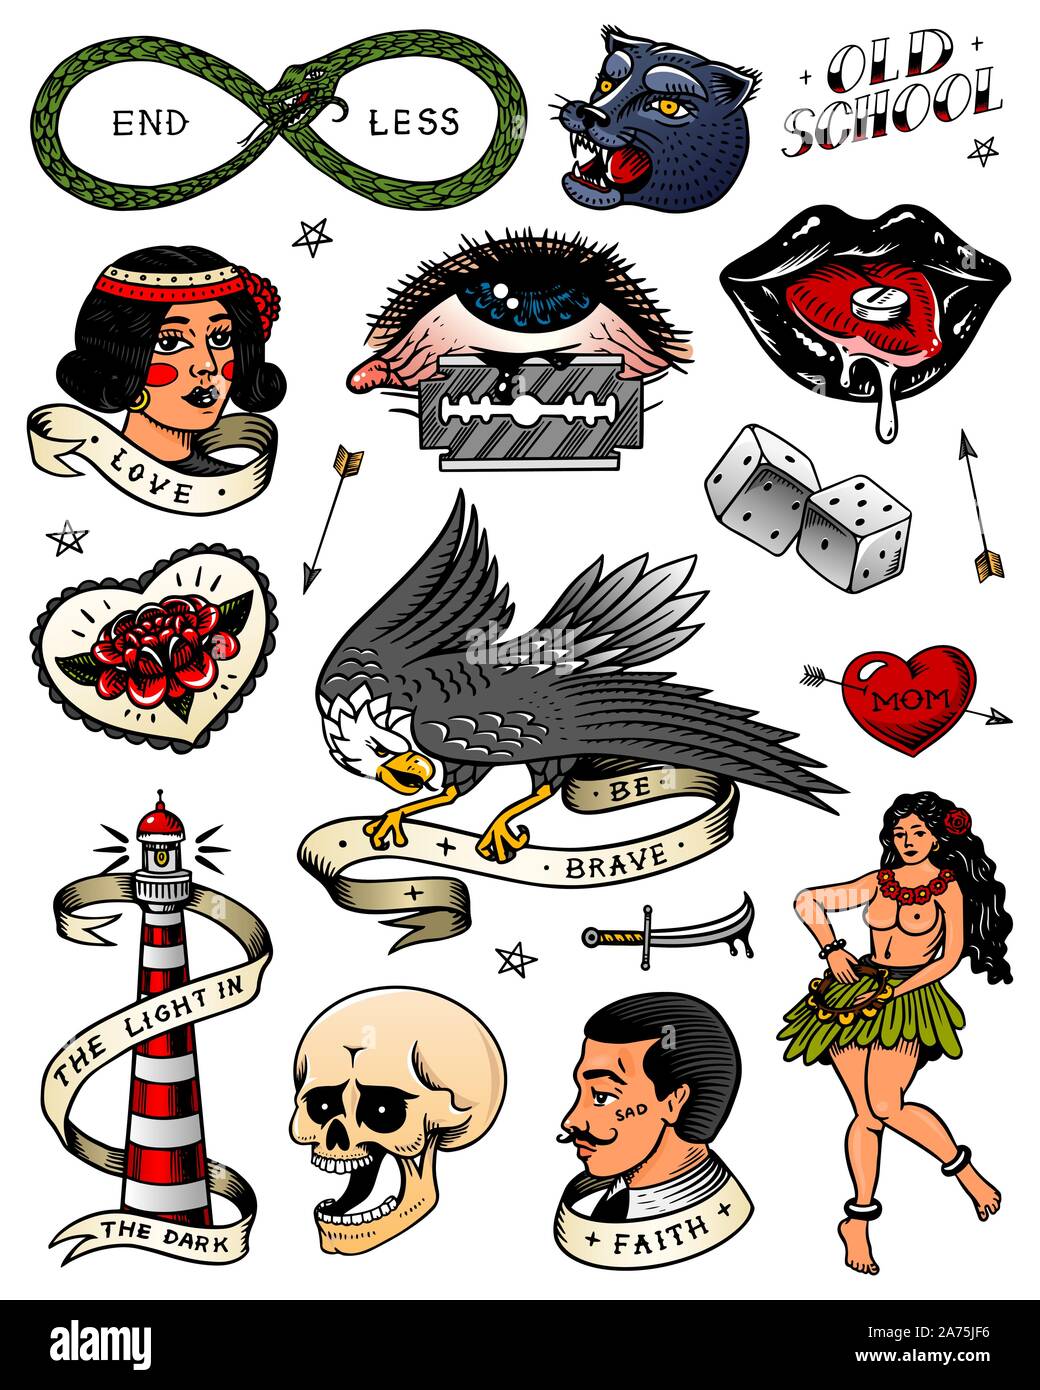 Old school traditional tattoo collection 839784